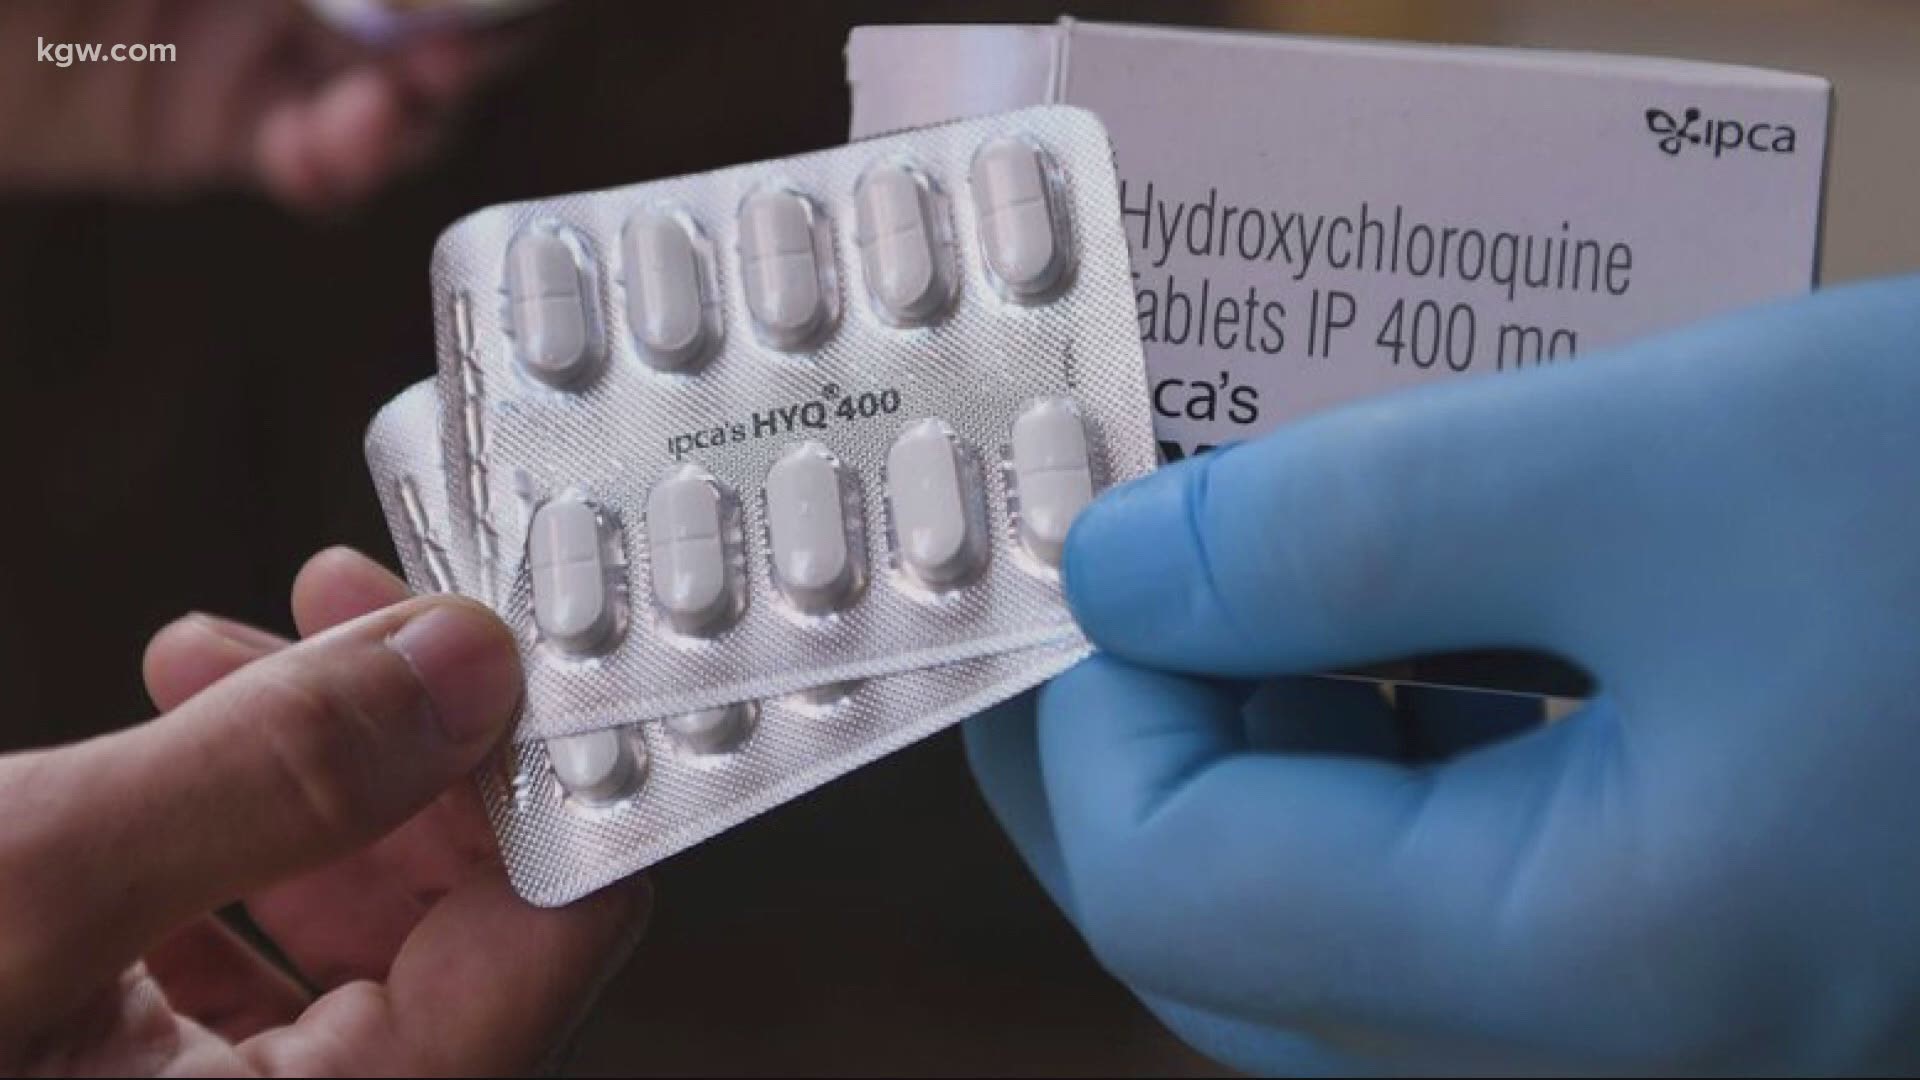 April Schumacher hopes people understand hydroxychloroquine is not FDA approved to treat COVID-19, but it is a proven treatment for lupus and other illnesses.